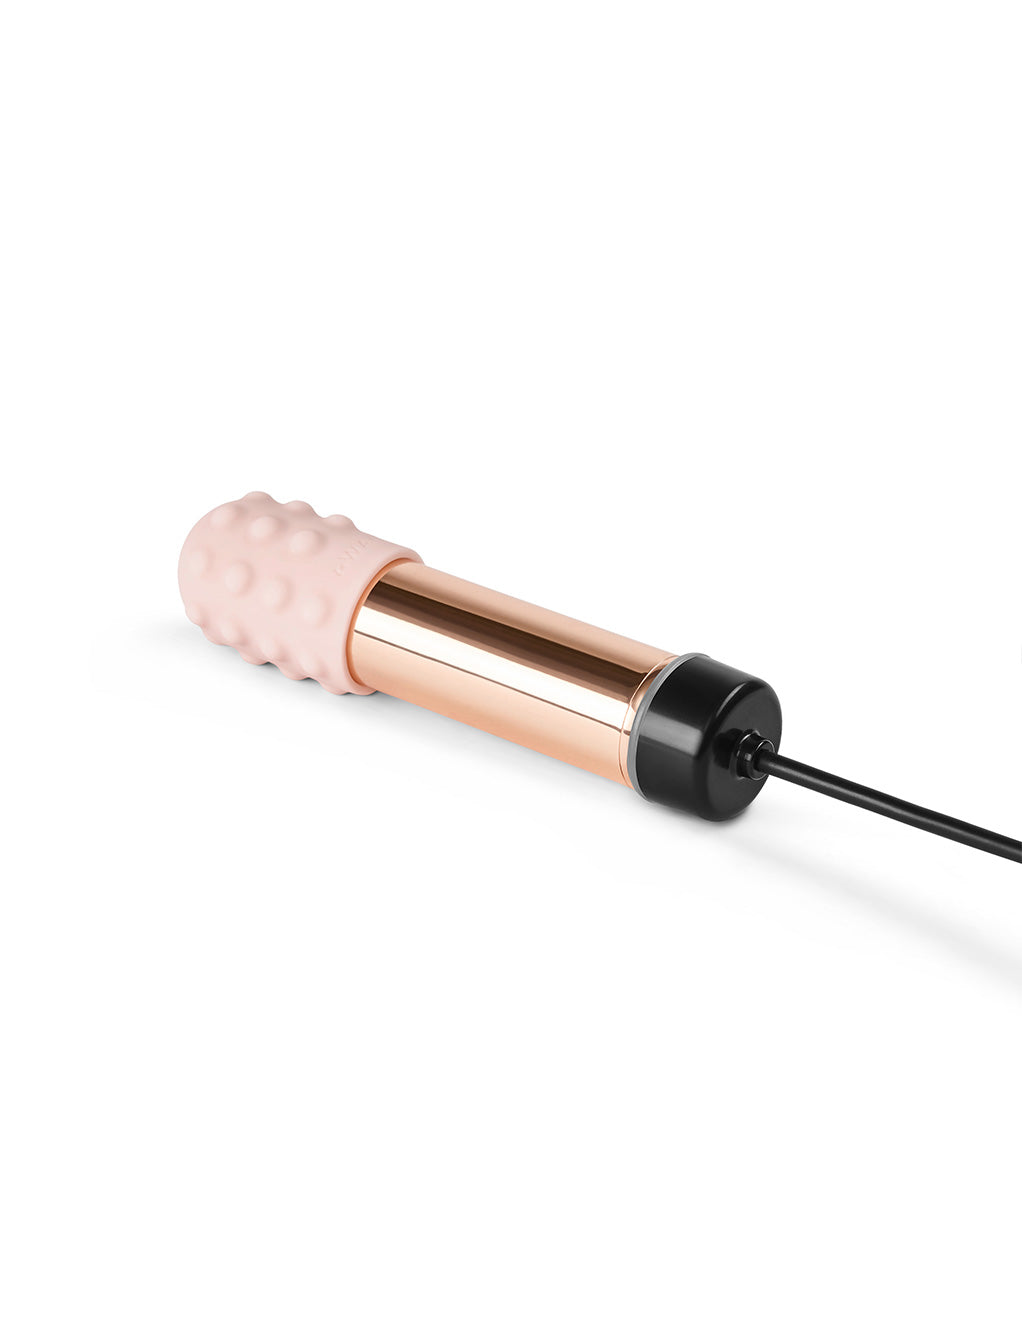 Le Wand Bullet Rechargeable Clitoral Vibrator- Rose Gold- Charging